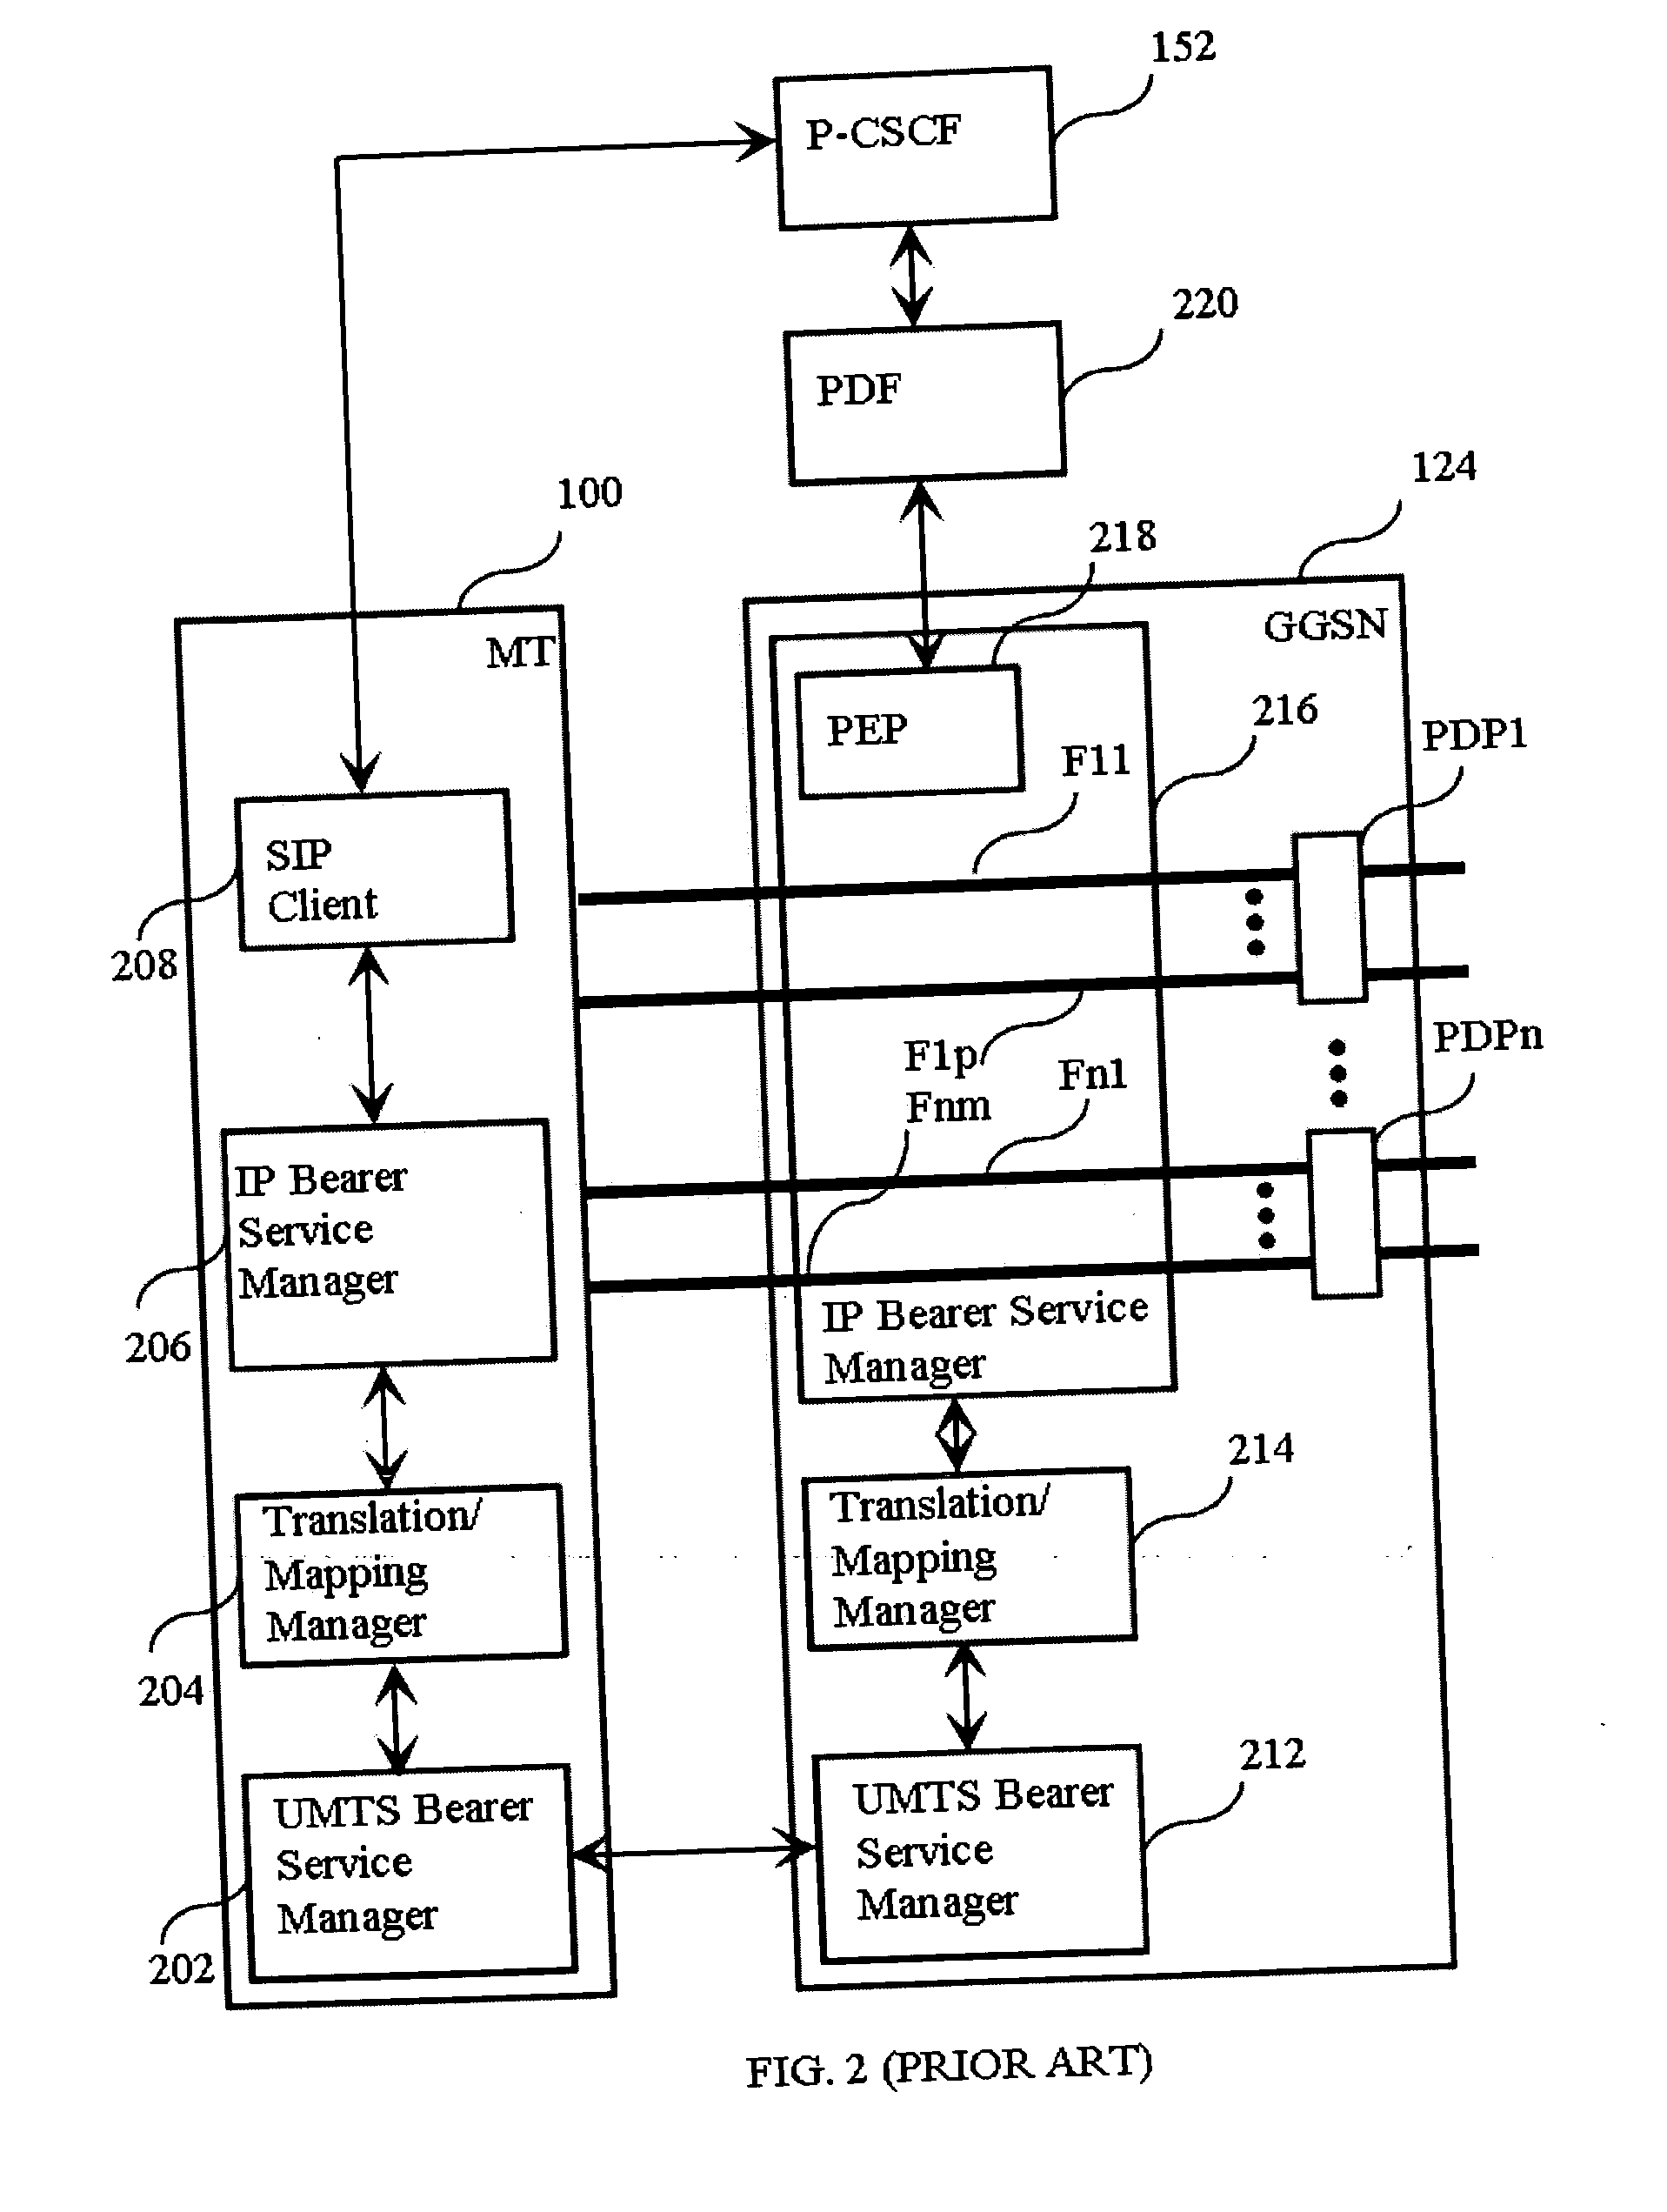 Method for the mapping of packet flows to bearers in a communication system